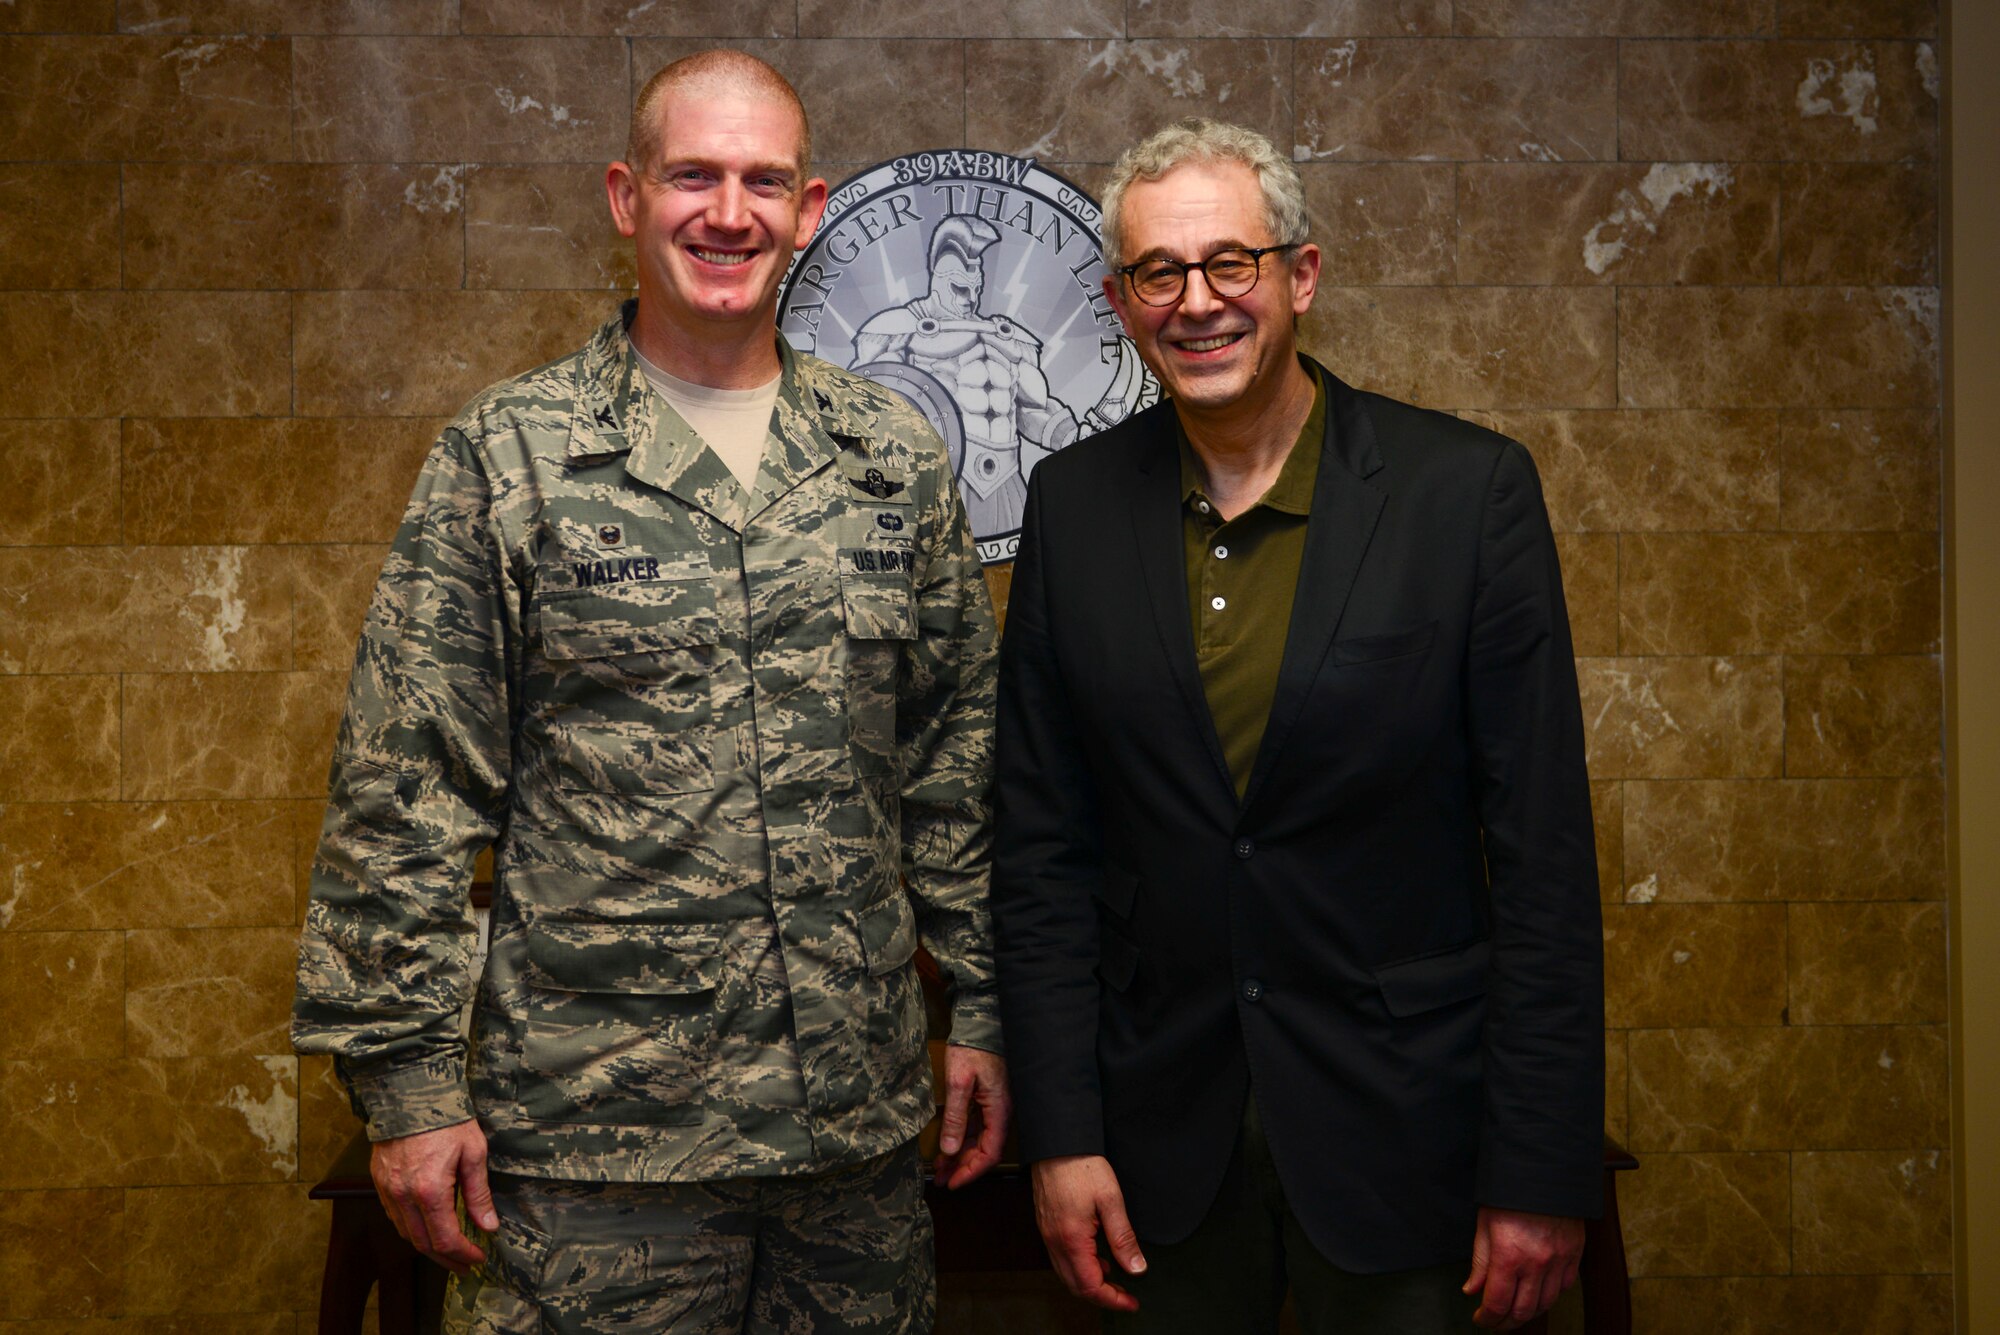 Col. John Walker, 39th Air Base Wing commander, and Gerd Hoofe, German State Secretary at the Federal Ministry of Defense, pose for a photo, April 7, 2016, at Incirlik Air Base, Turkey. Hoofe came to Incirlik AB to observe German operations first-hand. (U.S. Air Force photo by Staff Sgt. Caleb Pierce/Released)